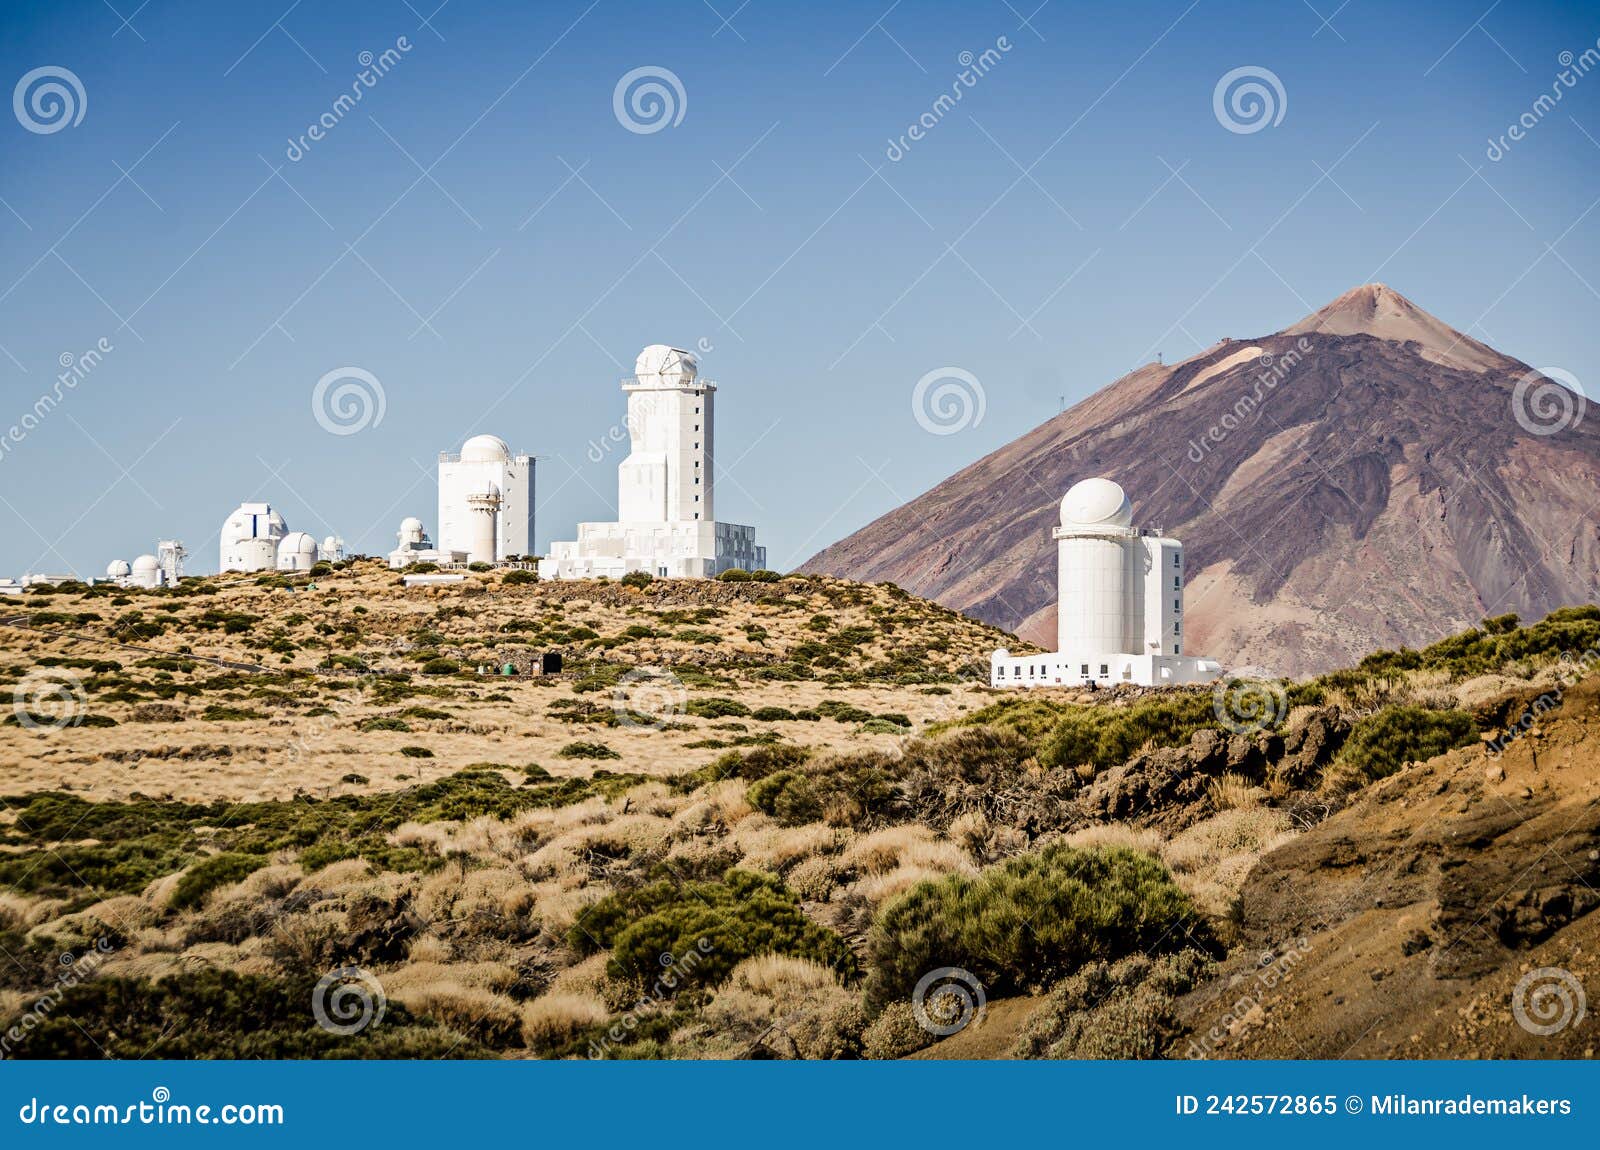 telescopes of tenerife. slooh observatory in las canadas national park. telescope domes with el teide volcano in the background.